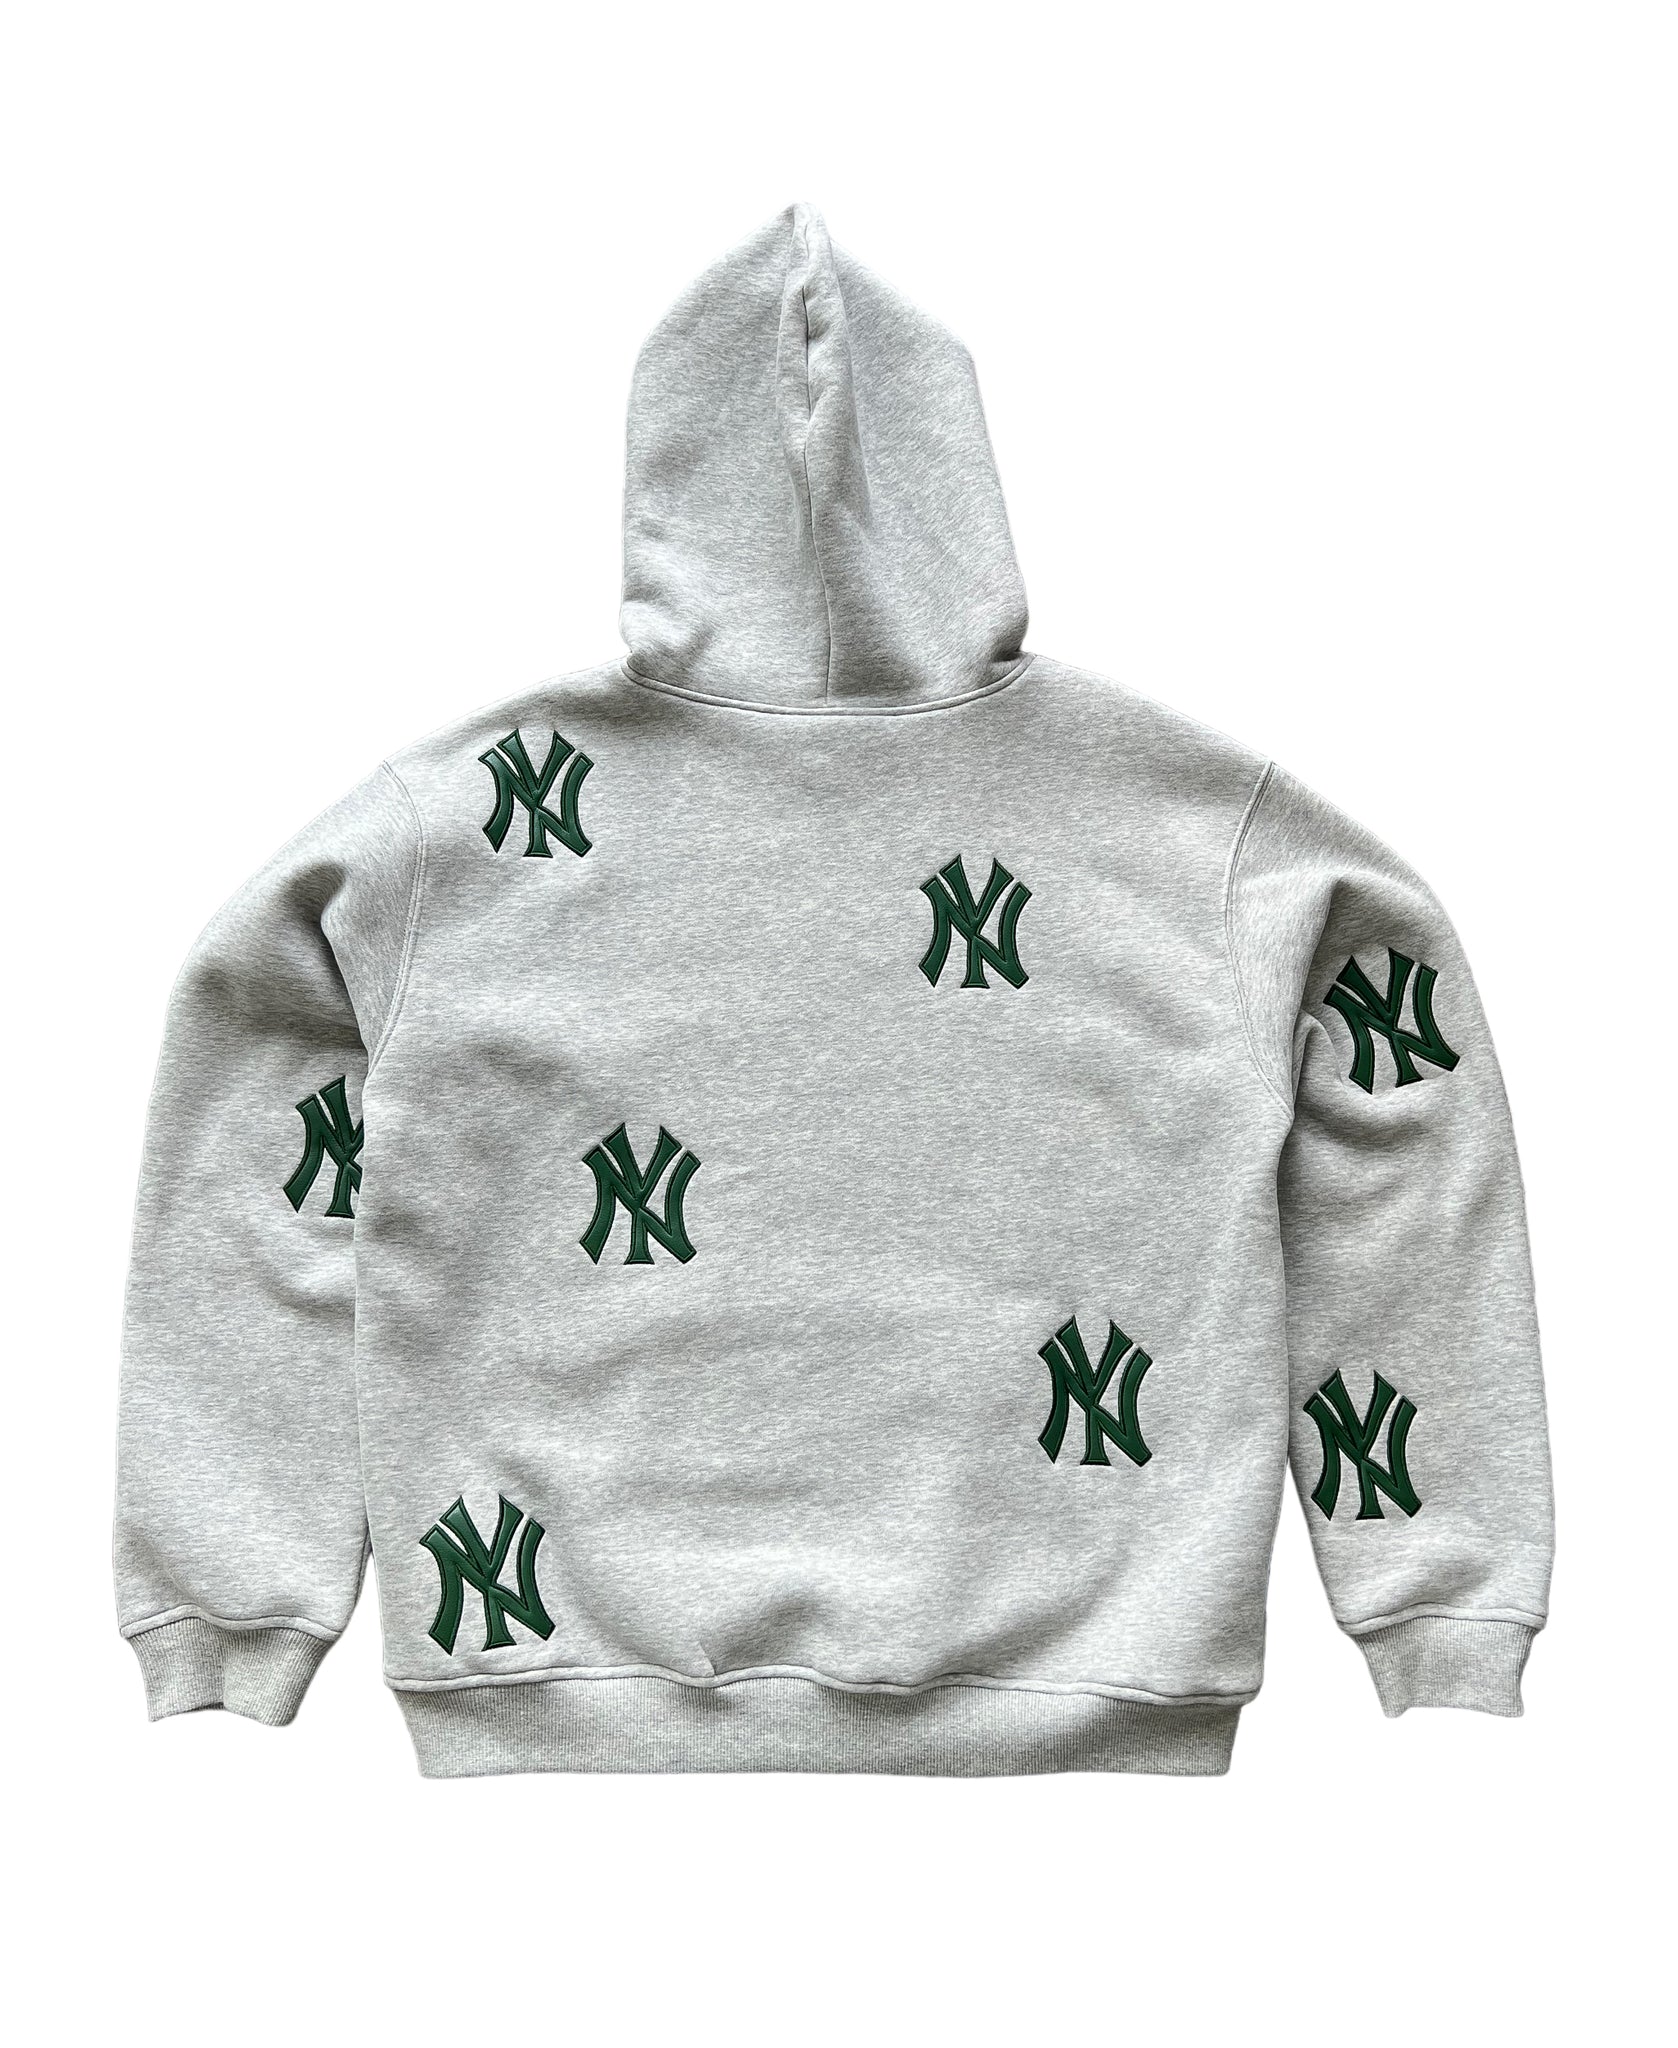 NY Patch Hoodie - Heather